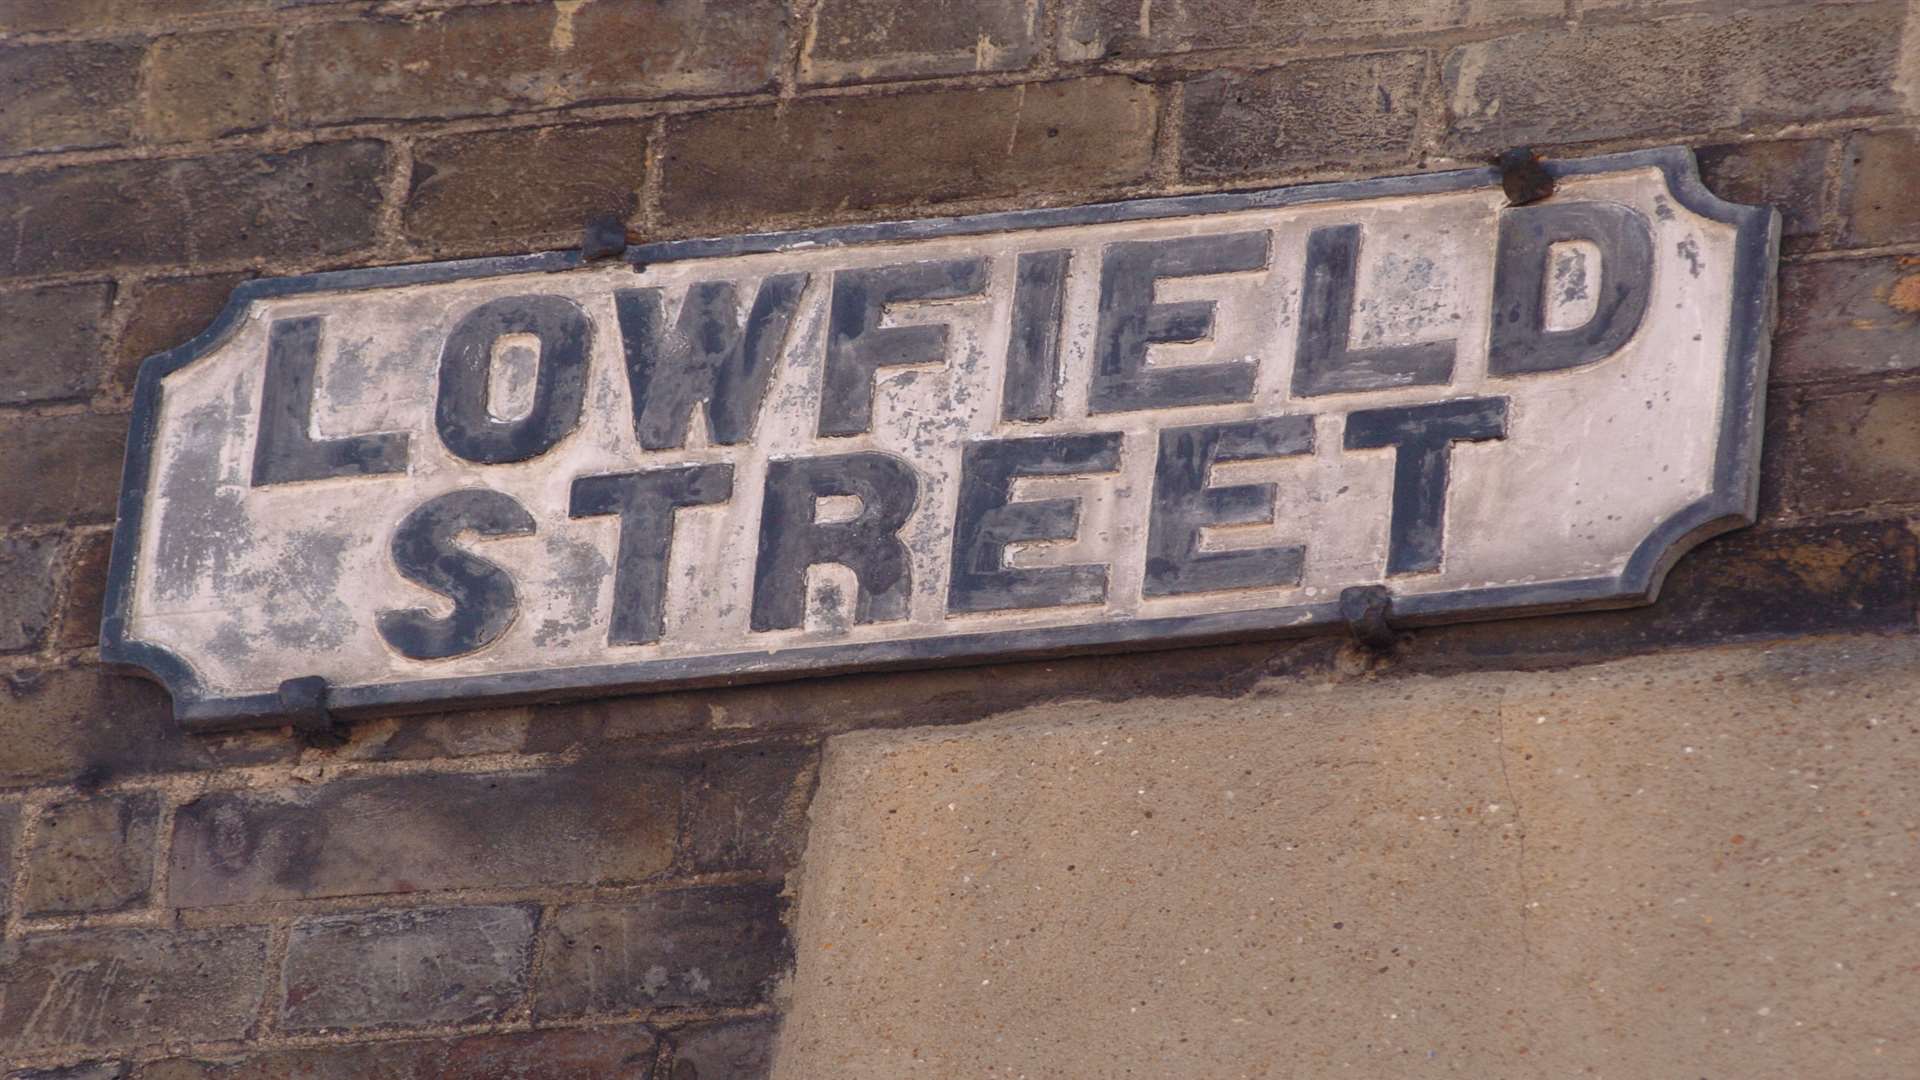 The street sign